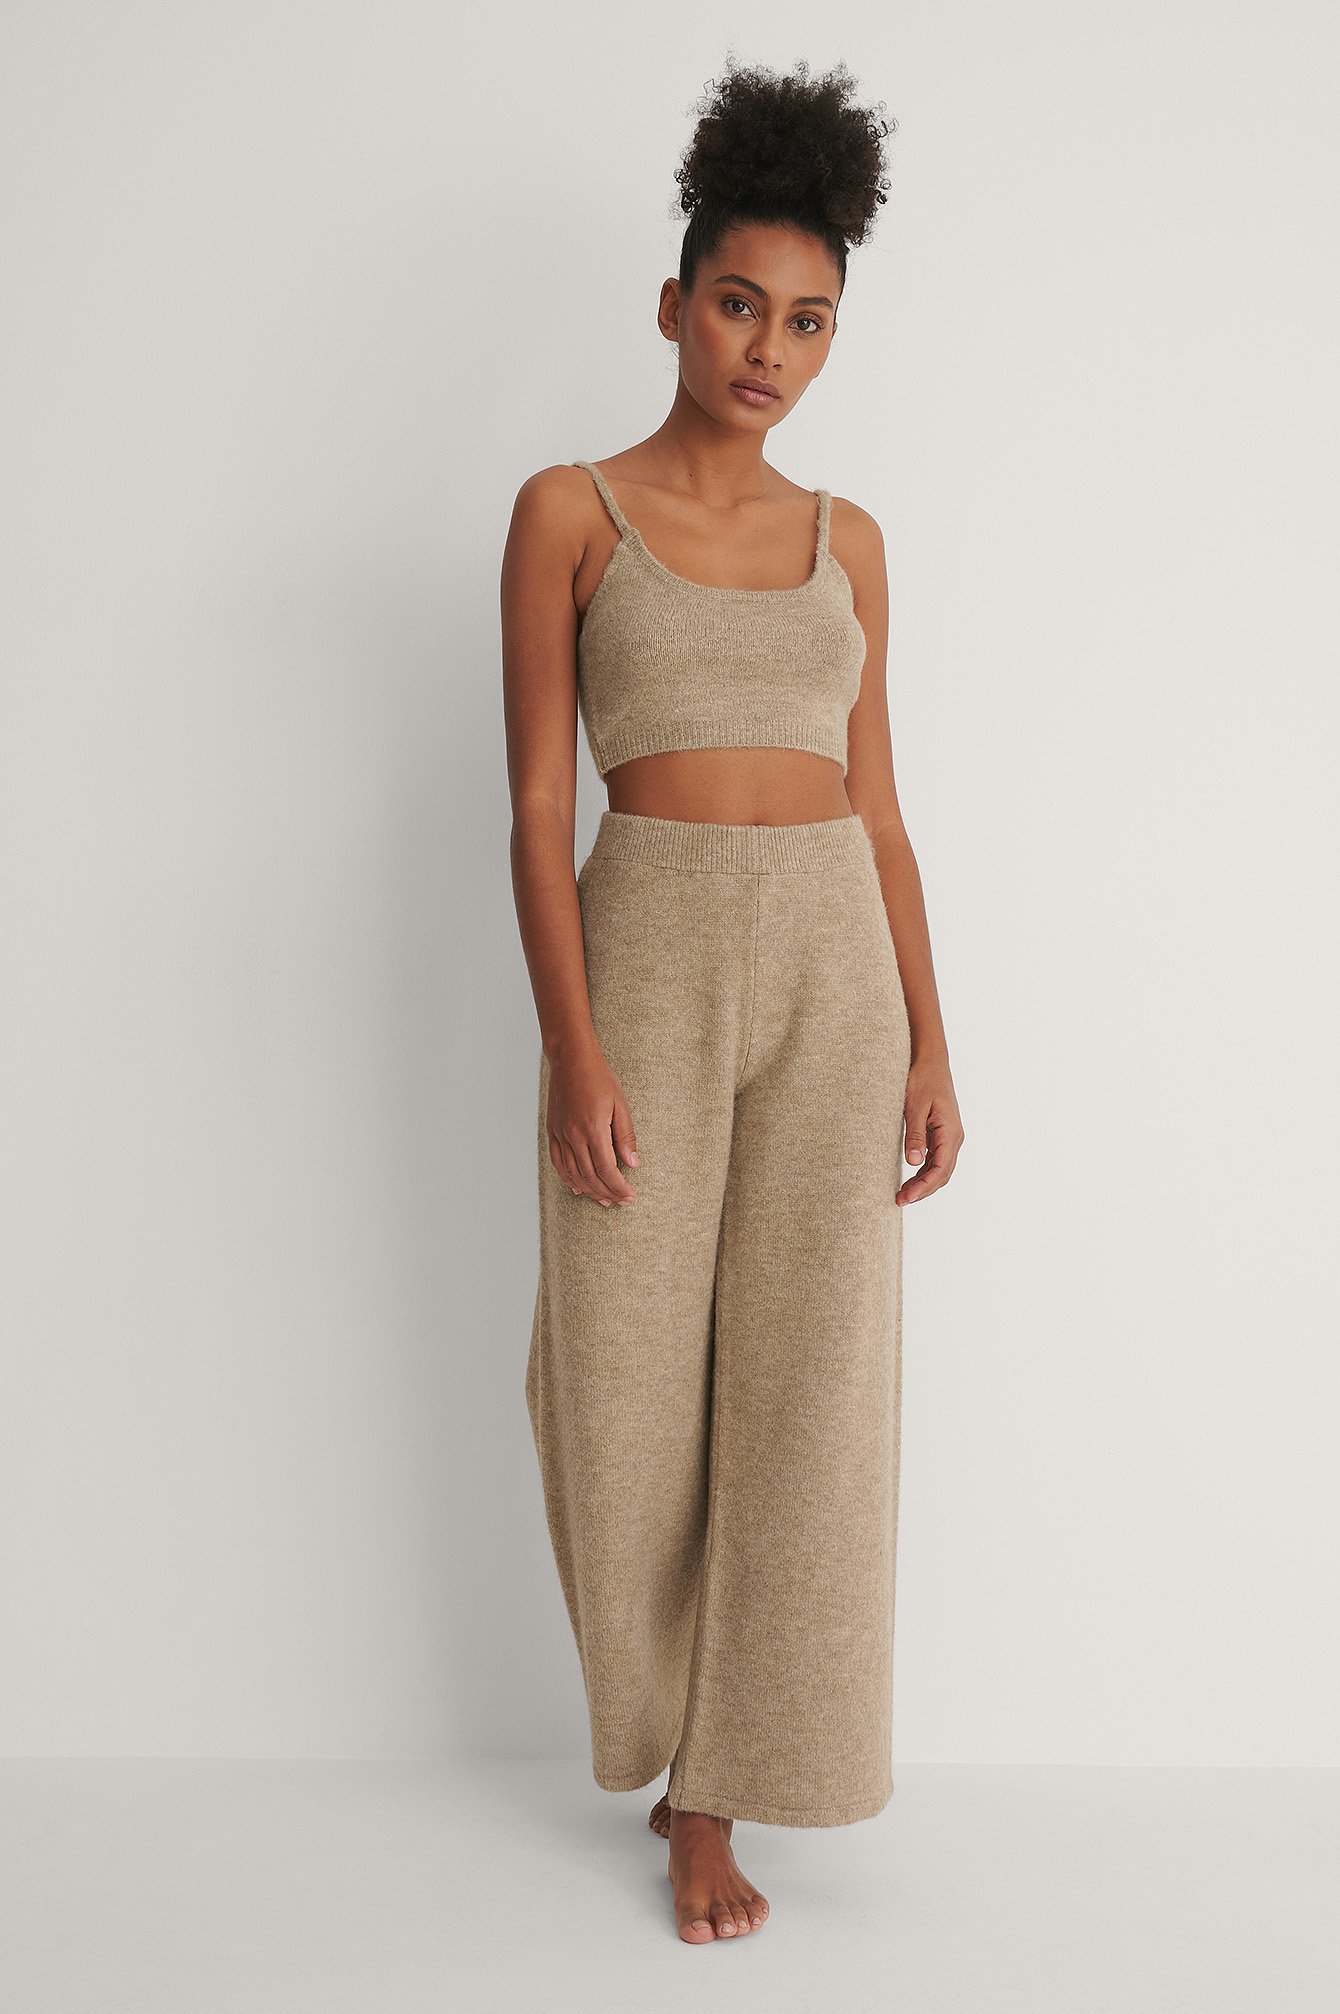 Knitted Cropped Top and Knitted Trousers Outfit.